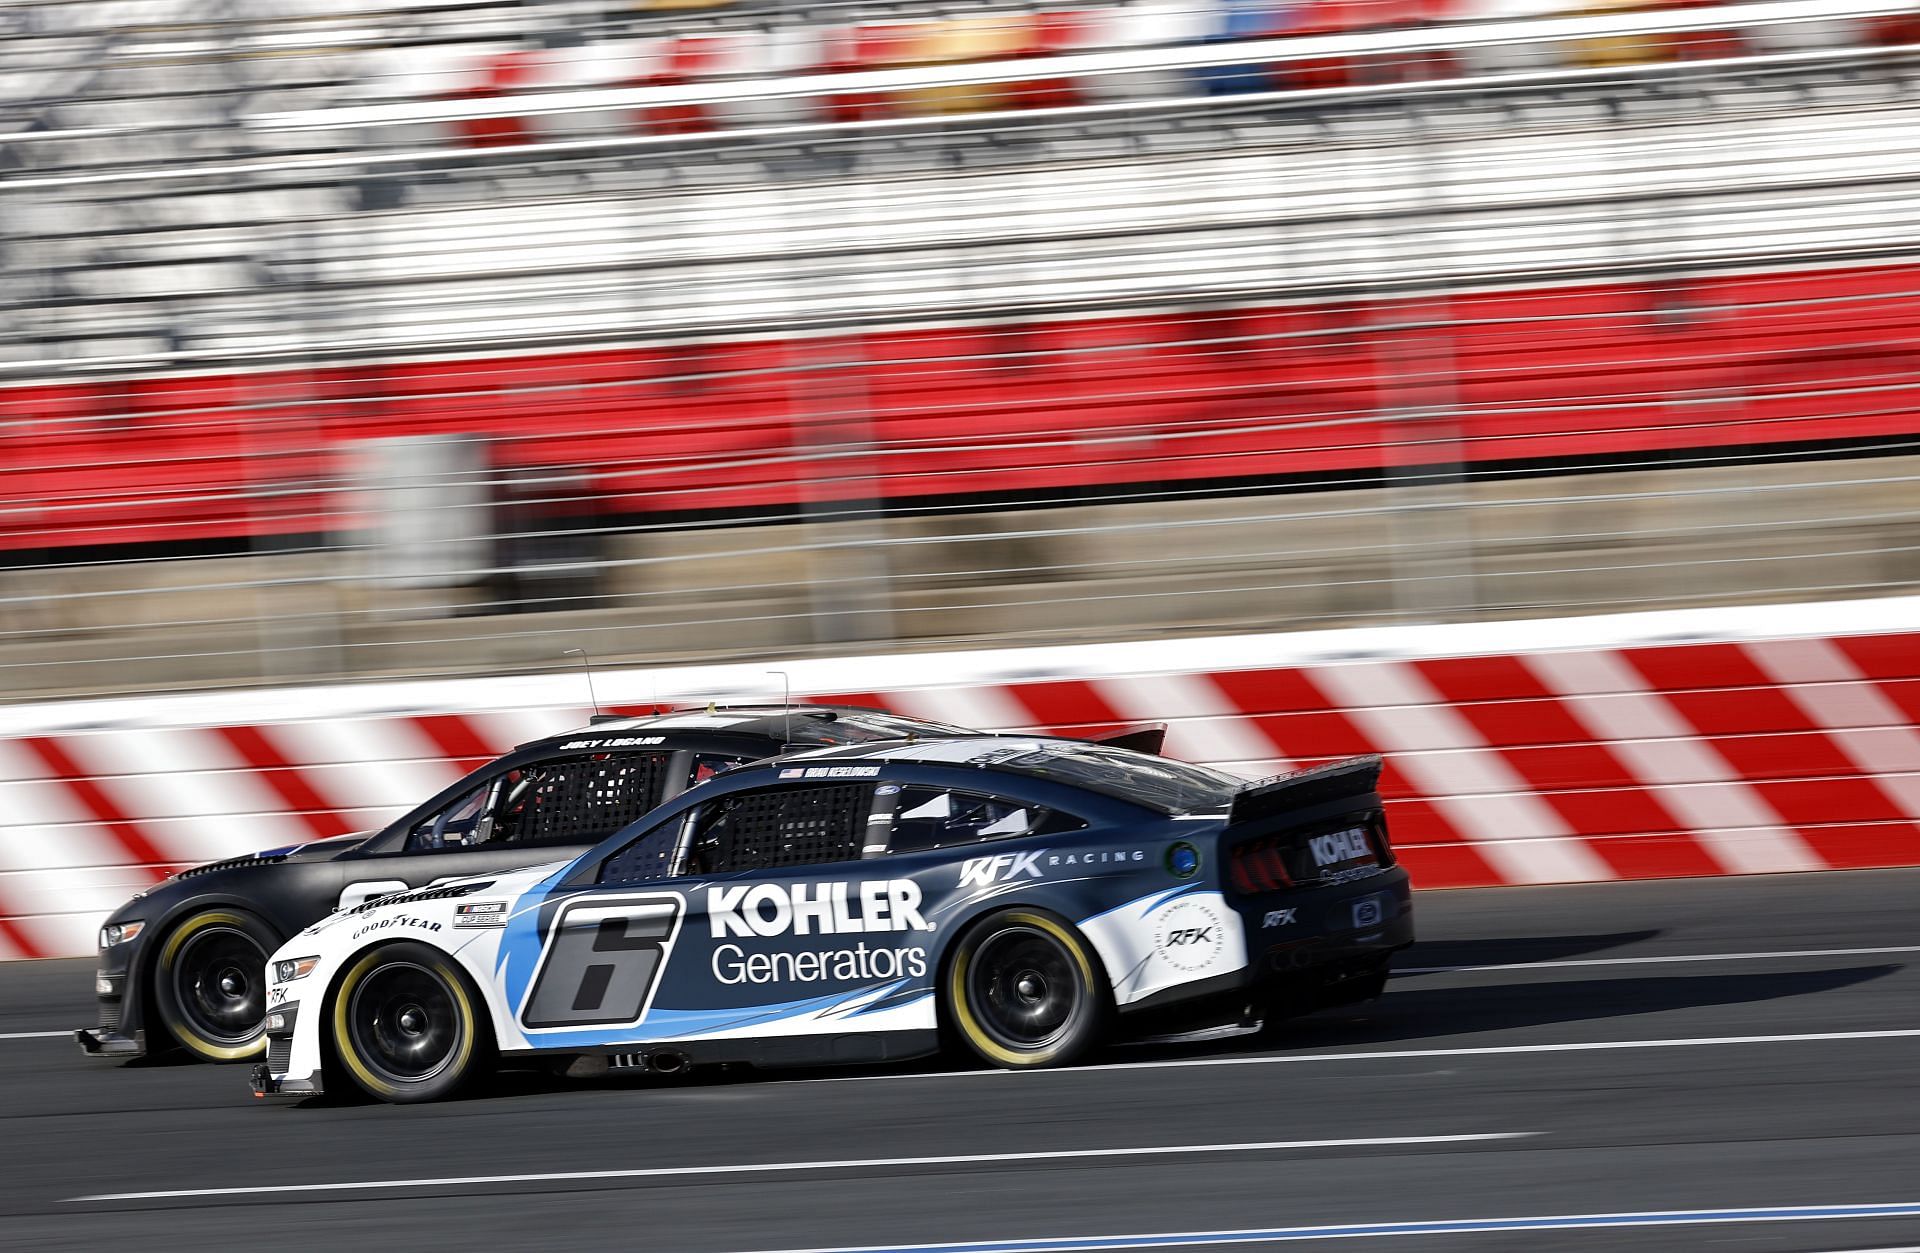 NASCAR confiscates parts from RFK Racing and Team Penske post-Daytona 500 duel races